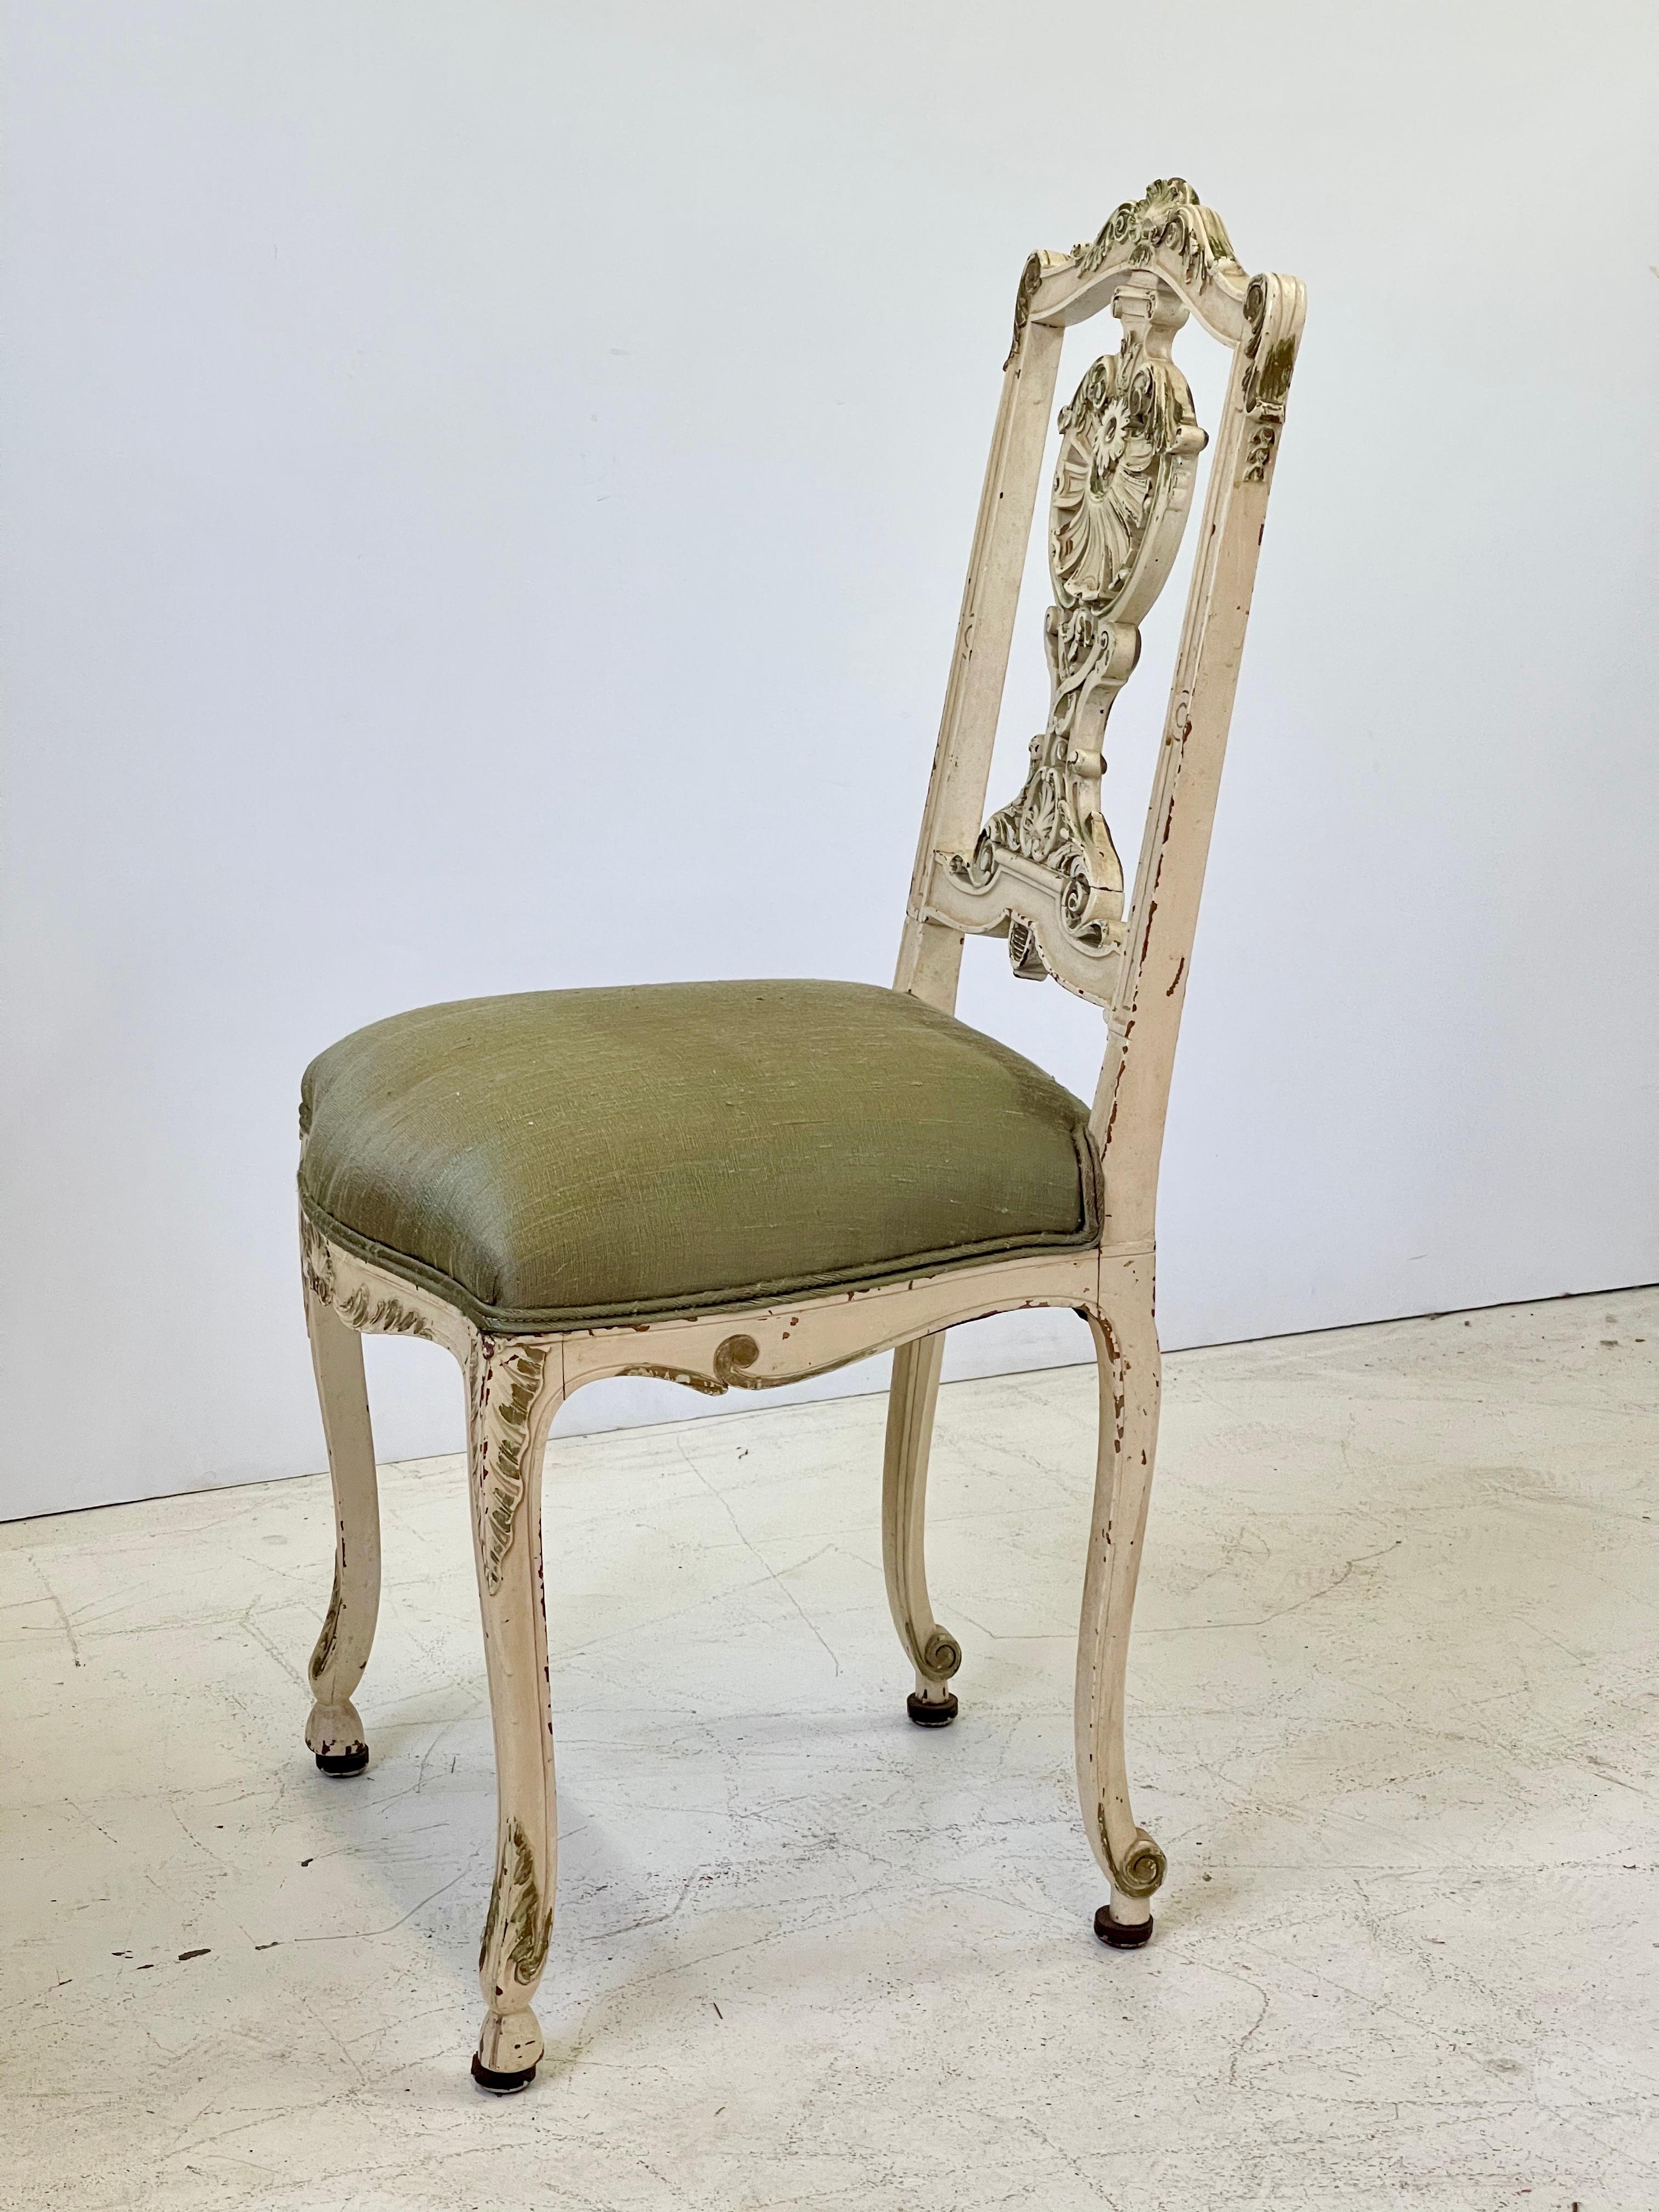 Early 20th century Italian vanity or petite side chair finely carved in the Louis XV style. The chair is painted in cream with gilded details that have beautifully worn over time. The seat has been newly upholstered in a complimentary green raw silk.